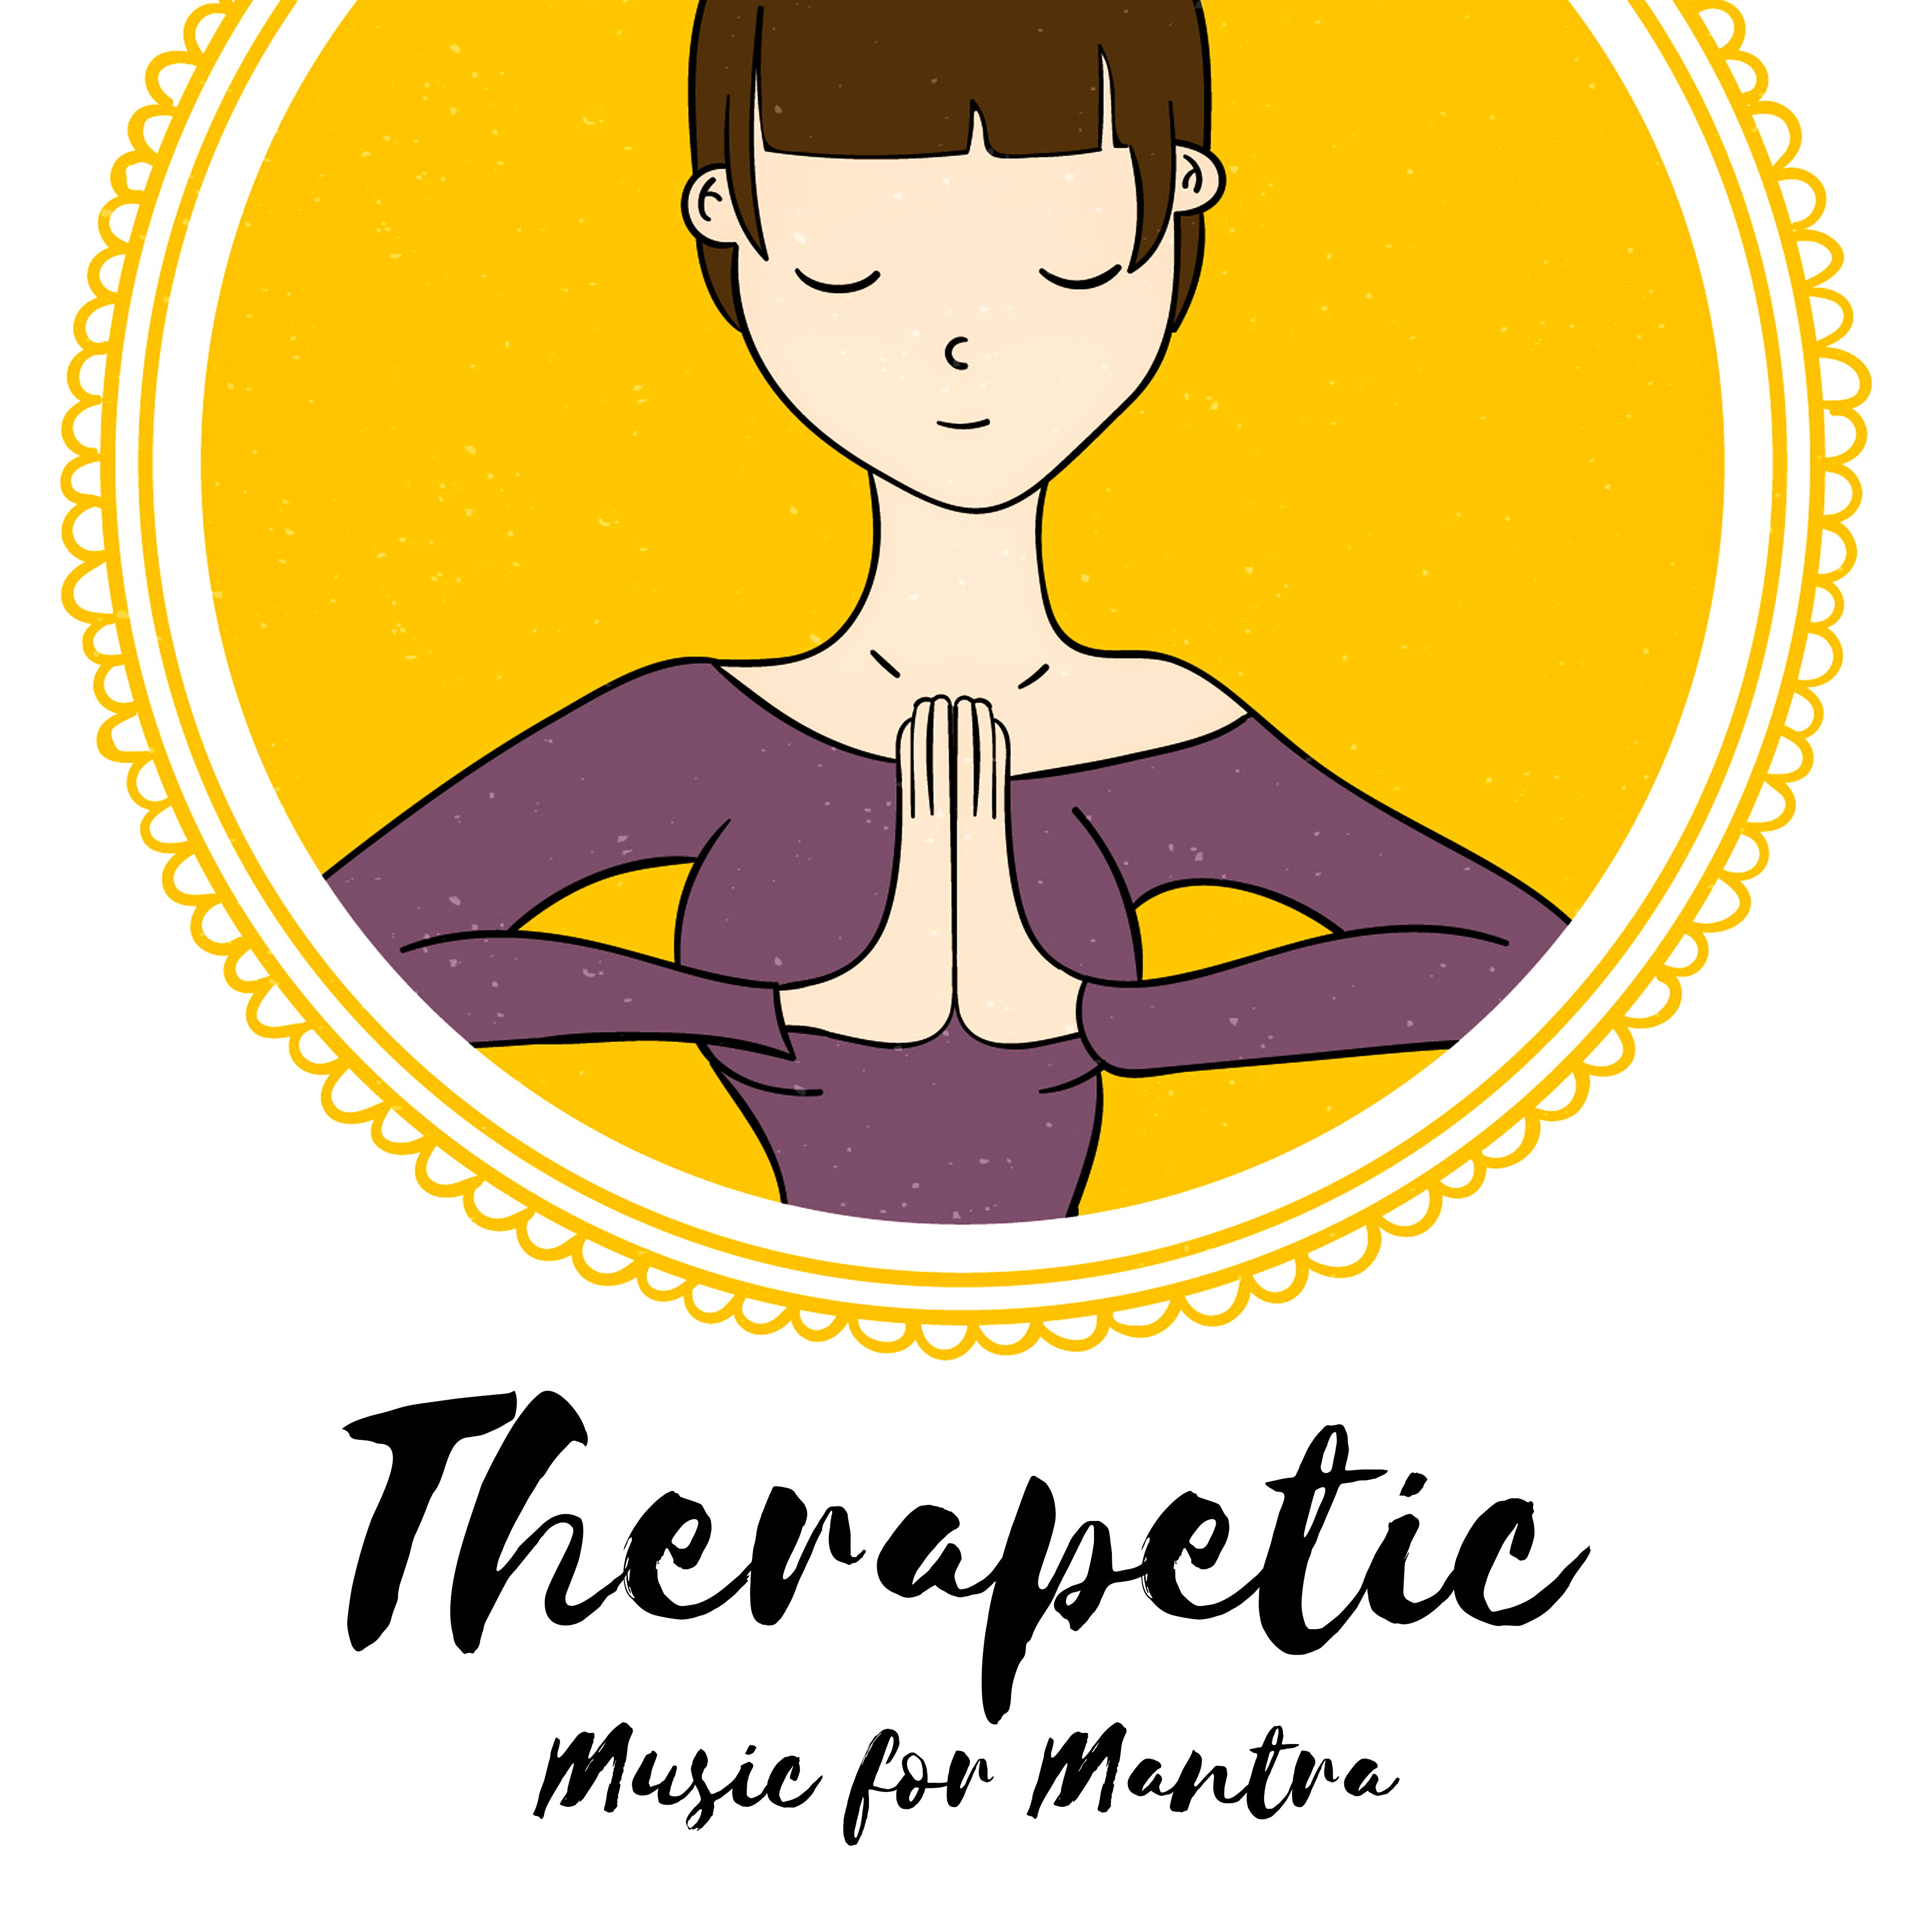 Therapetic Music for Mantra